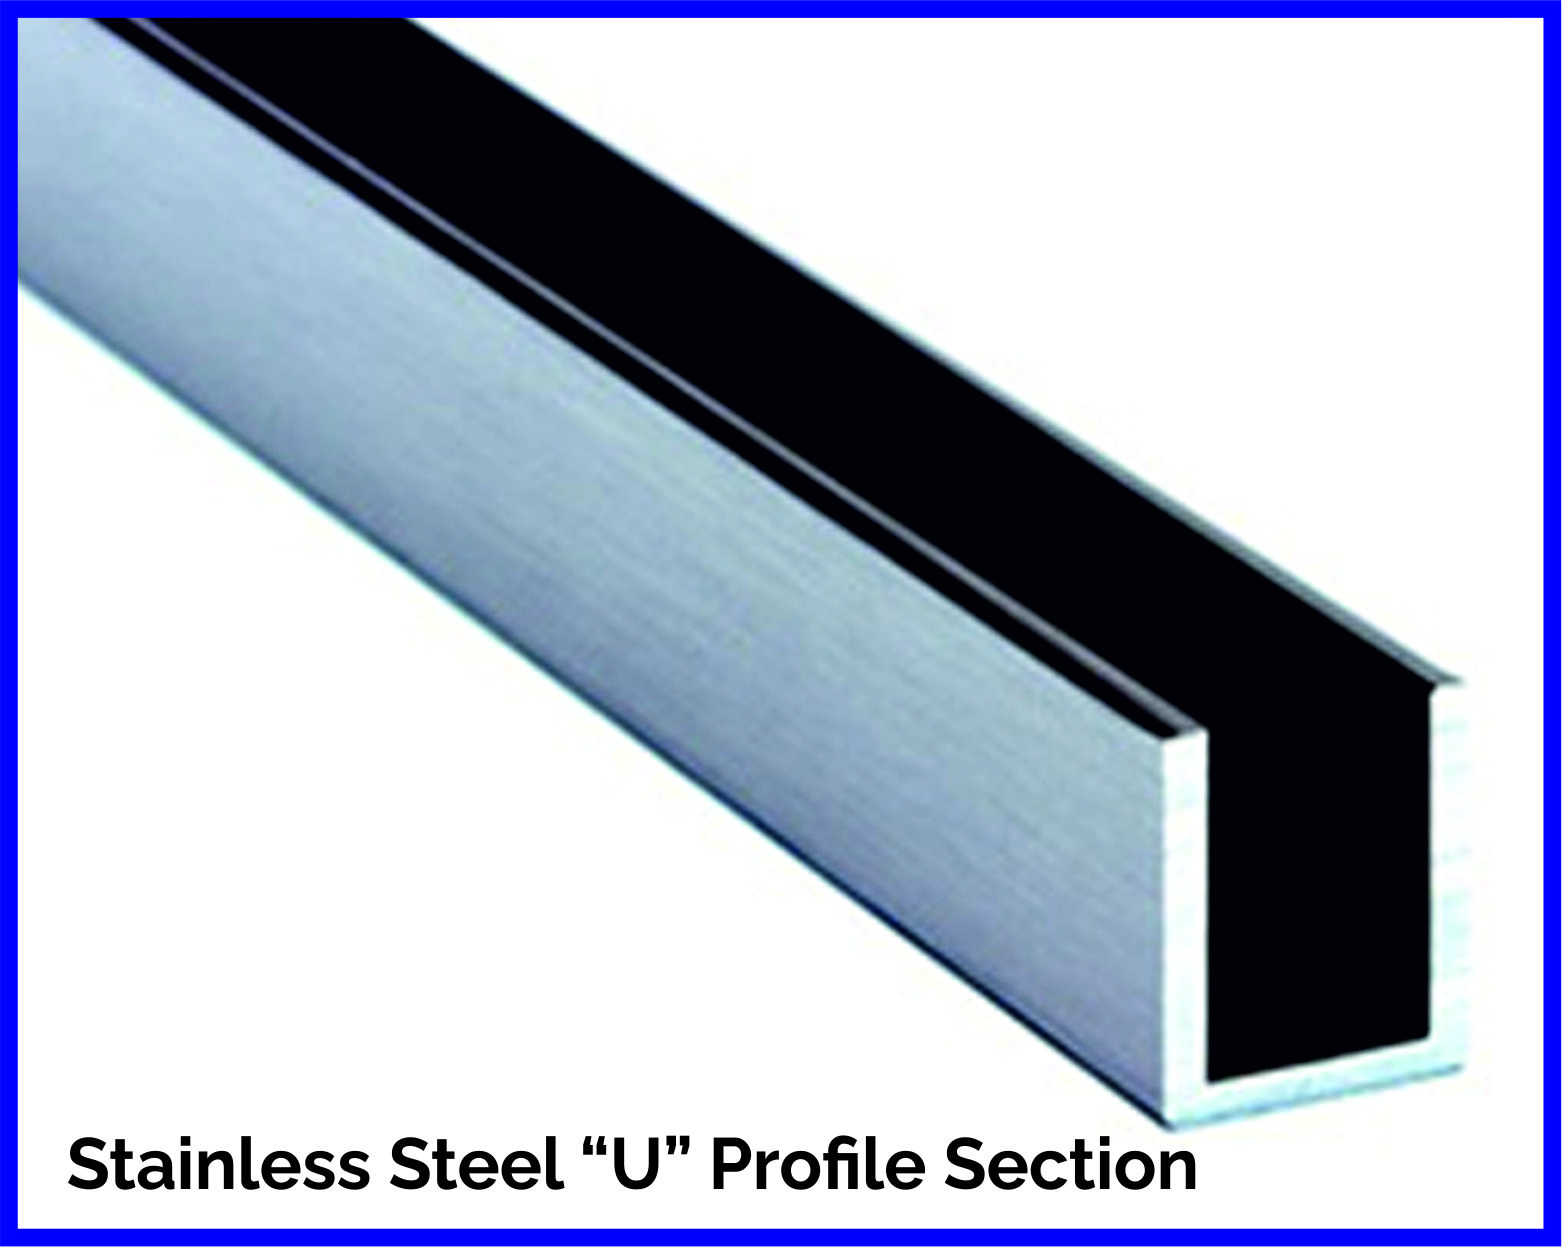 Decorative Stainless Steel U Profile Section